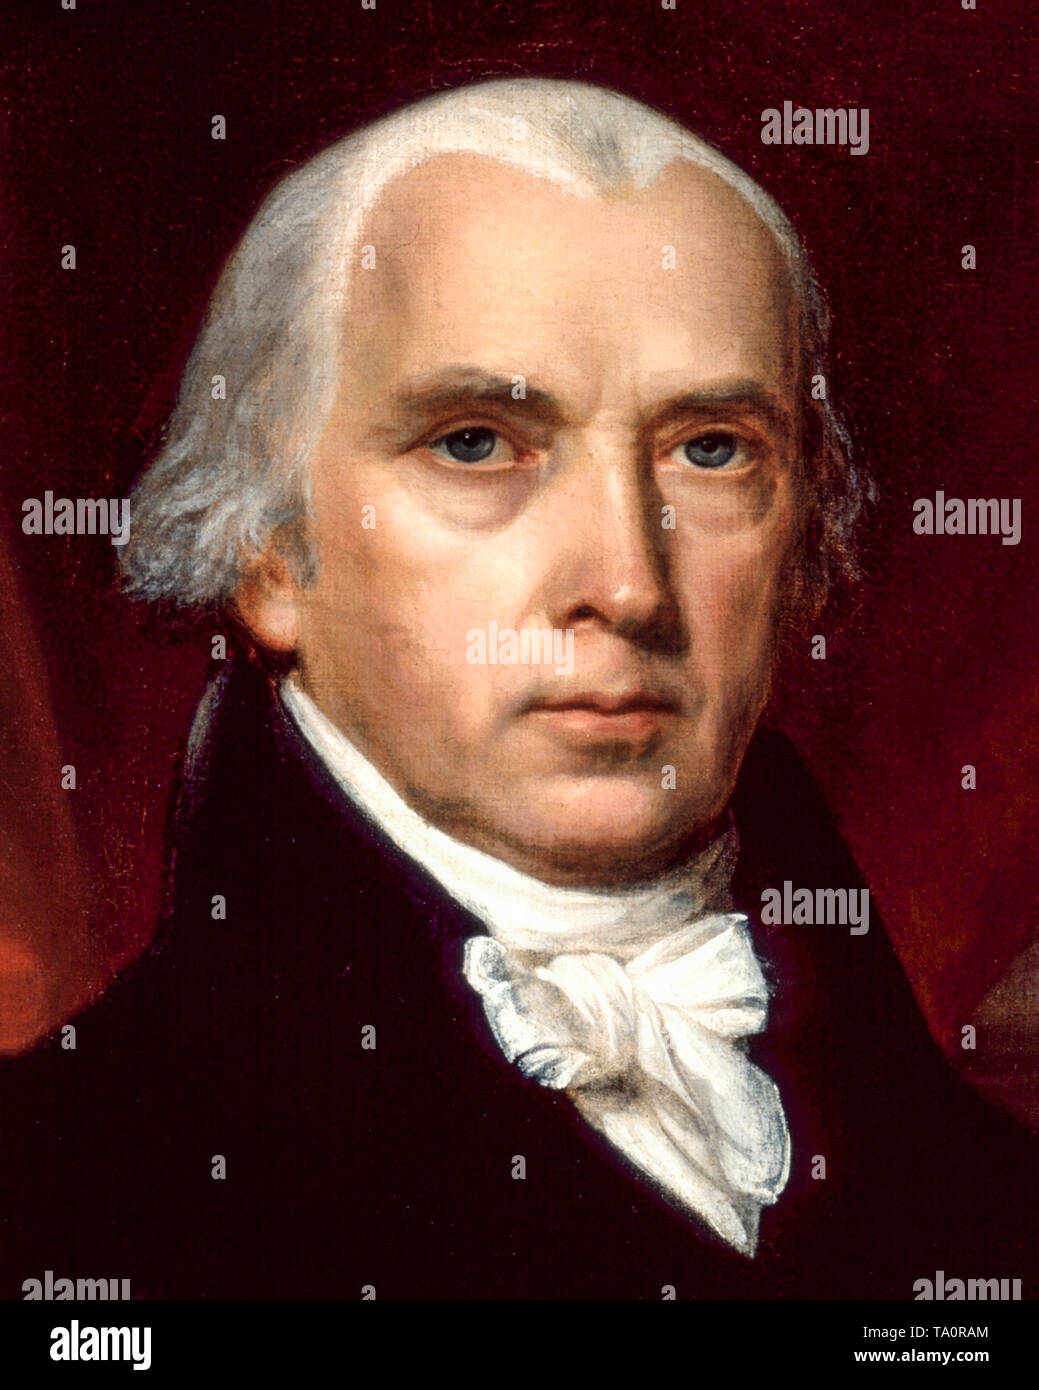 Portrait of James Madison the fourth President of the United States by  John Vanderlyn, 1816 Stock Photo